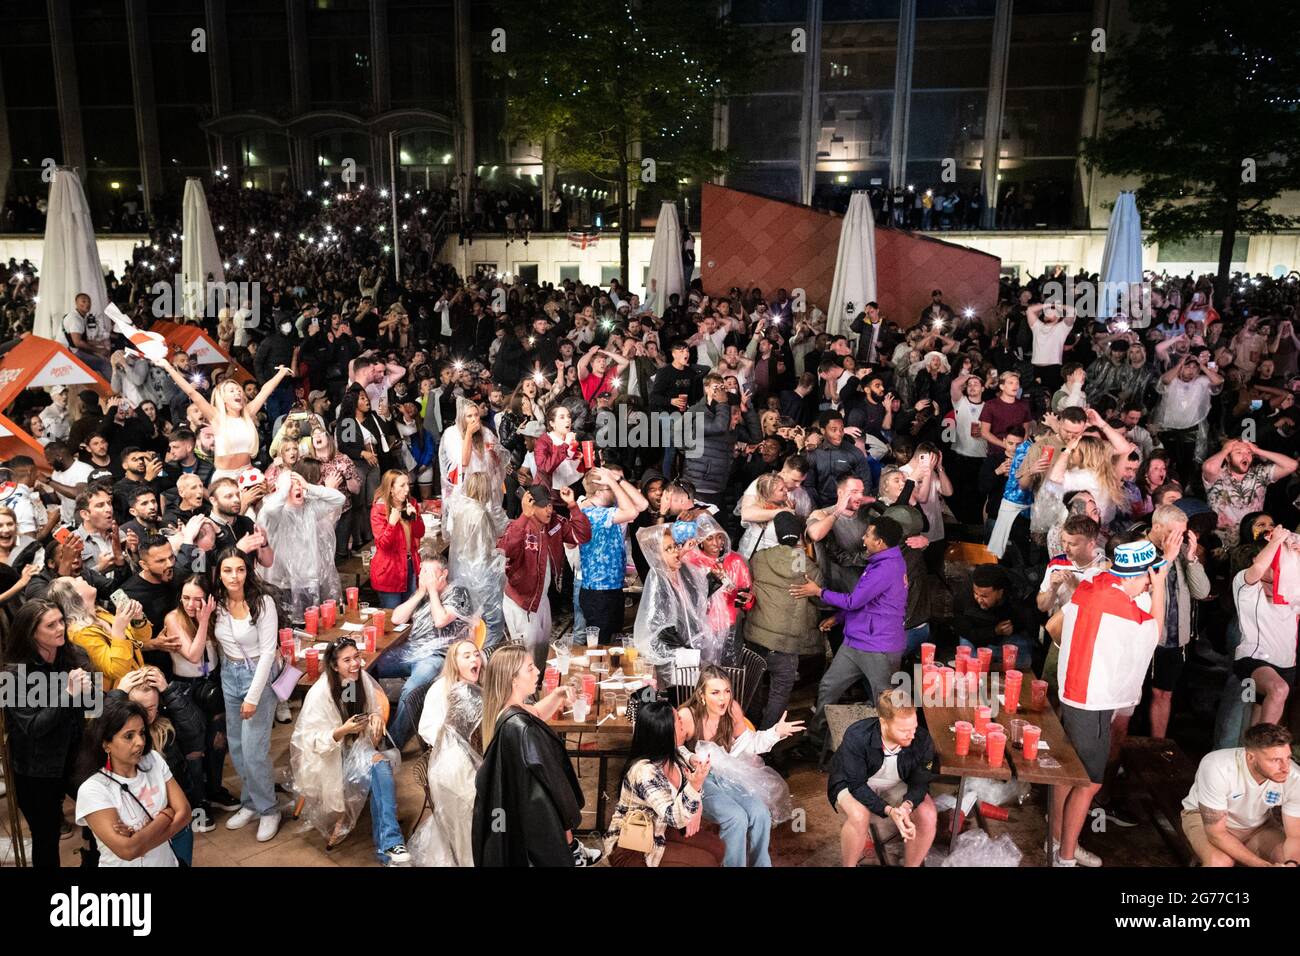 Manchester, UK. 11th July, 2021. Intense scenes down Spinningfields during the Euro2020 final which saw England get beaten by Italy during penalties. Football fans descended into the city early to try and catch the game wherever they could.ÊAndy Barton/Alamy Live News Credit: Andy Barton/Alamy Live News Stock Photo